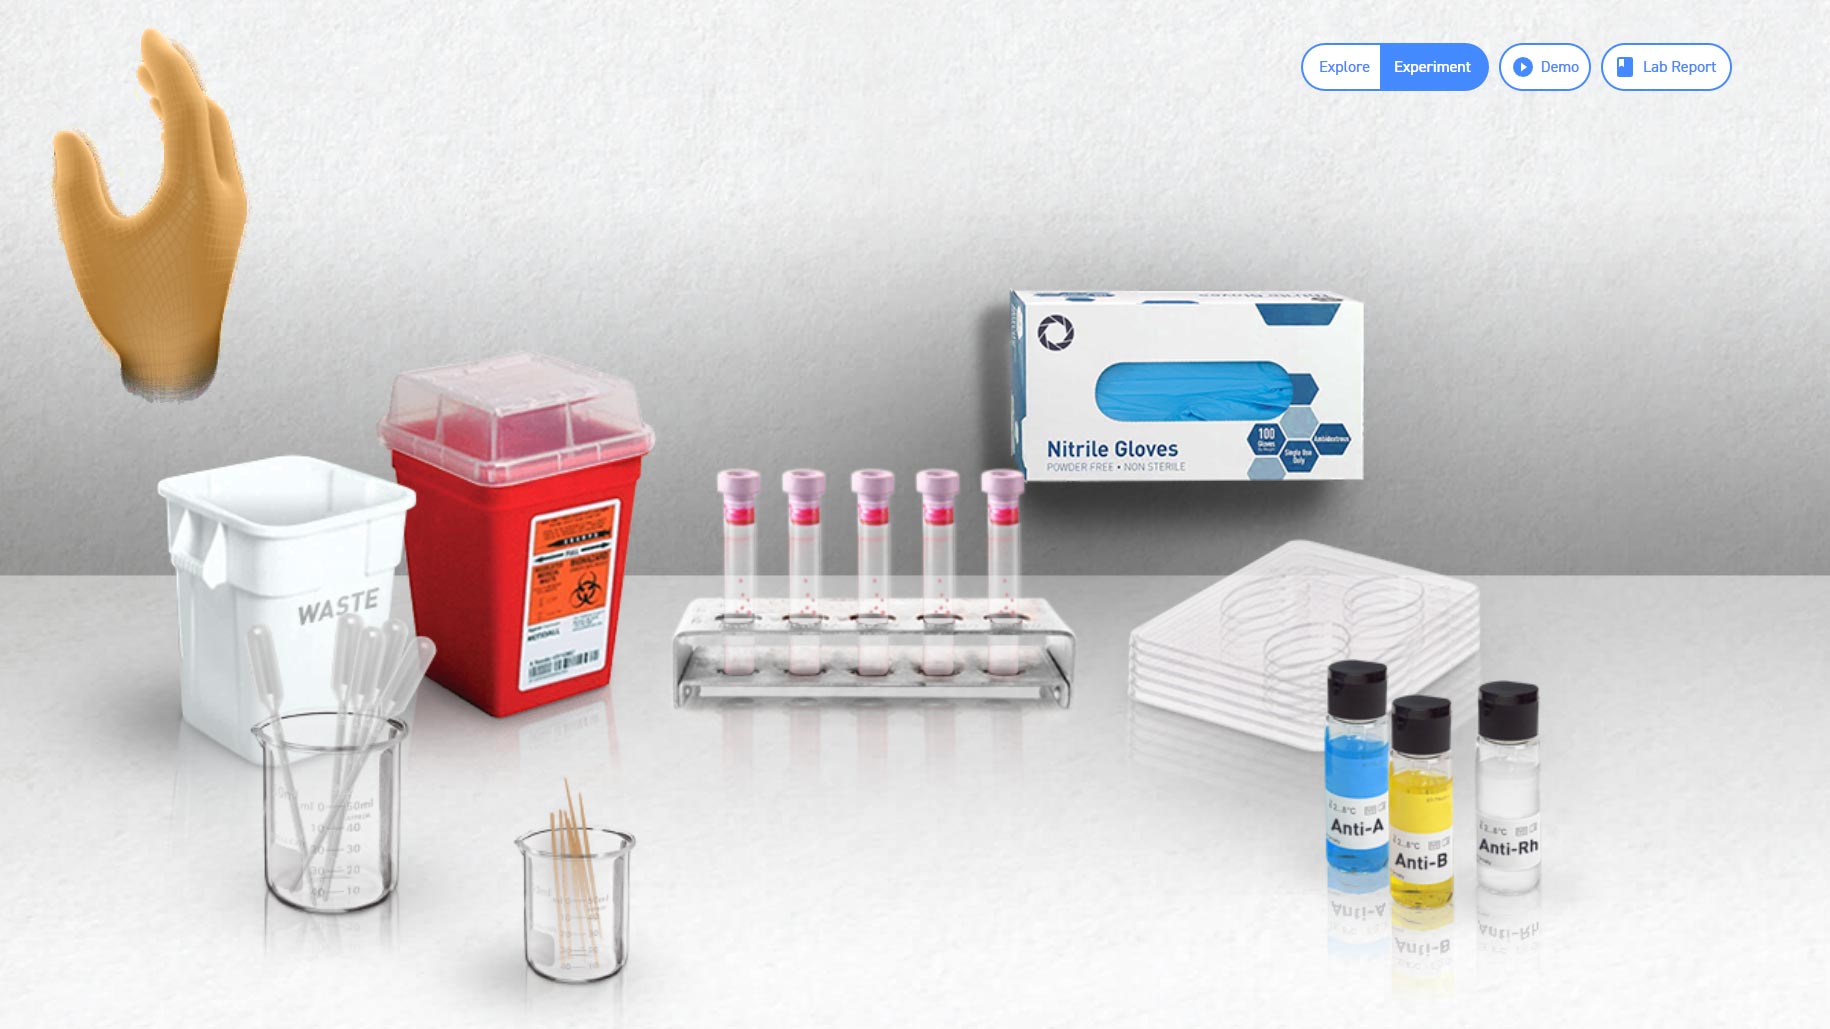 Interactive lab application for blood typing. Interactive elements include pipettes, waste and biowaste bins, blood samples, gloves, sample trays, antigens, and stir sticks.